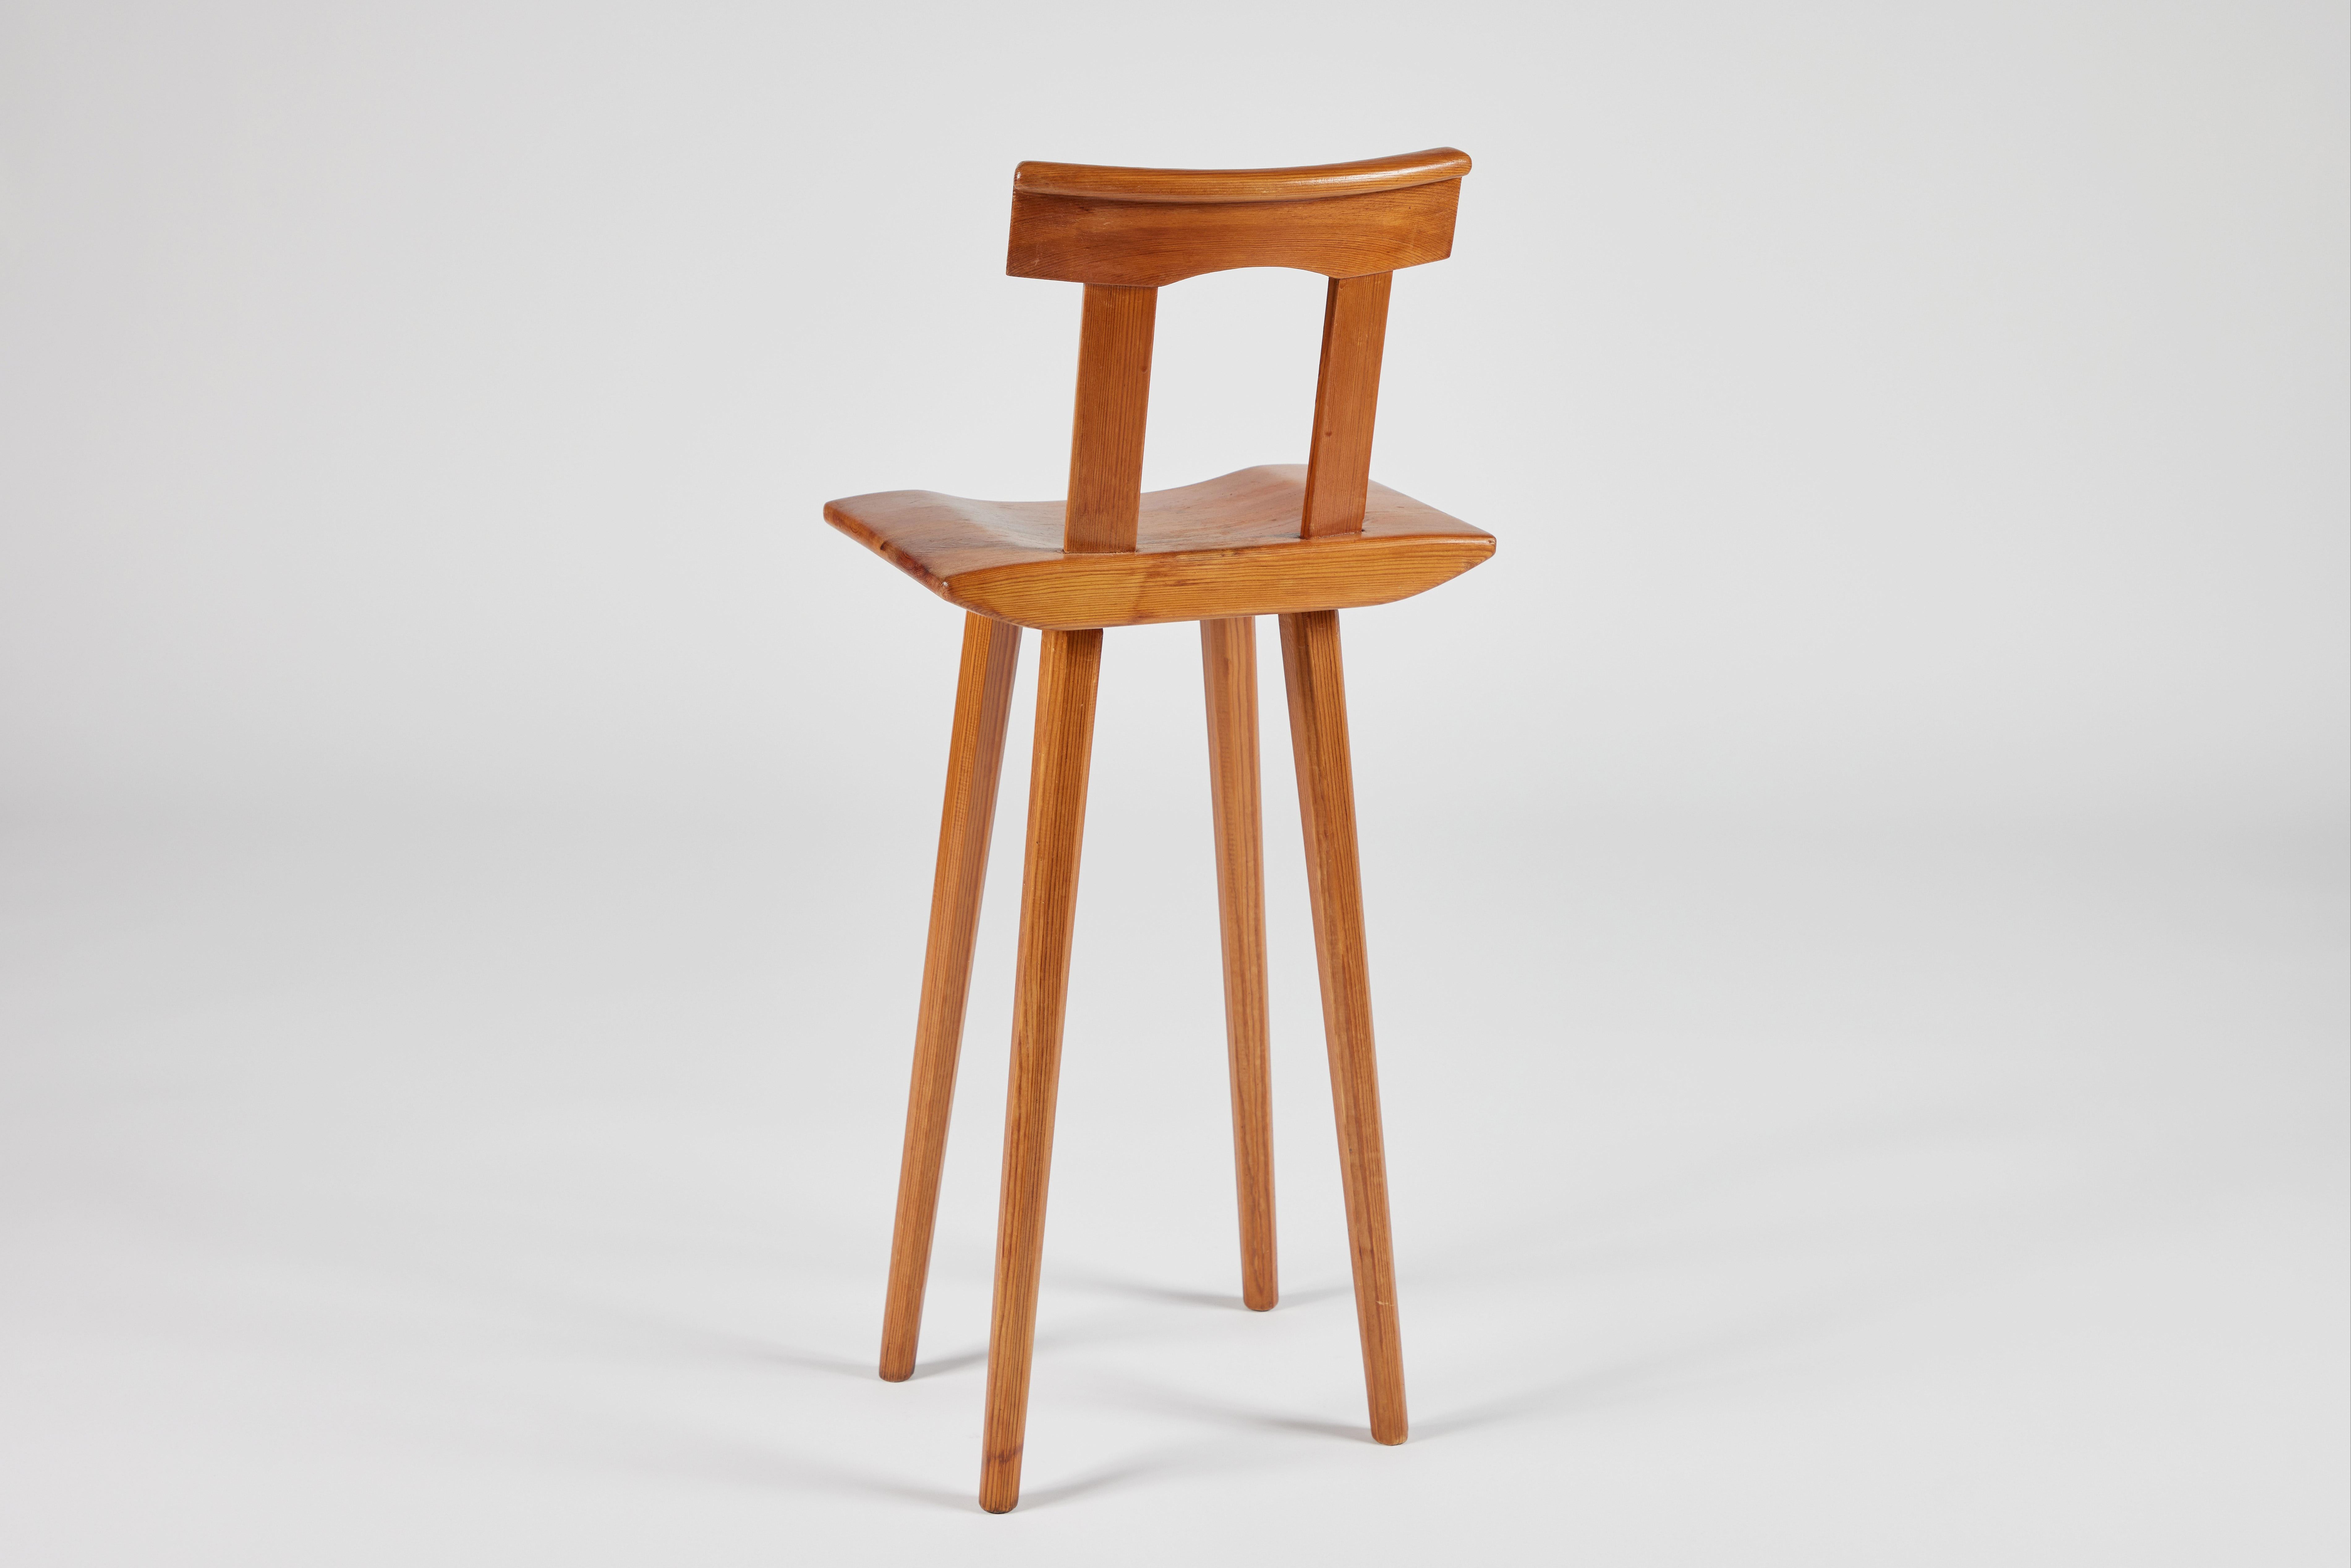 Mid-20th Century Midcentury Swedish Child's High Chair or Stool by Bengt Lundgren For Sale